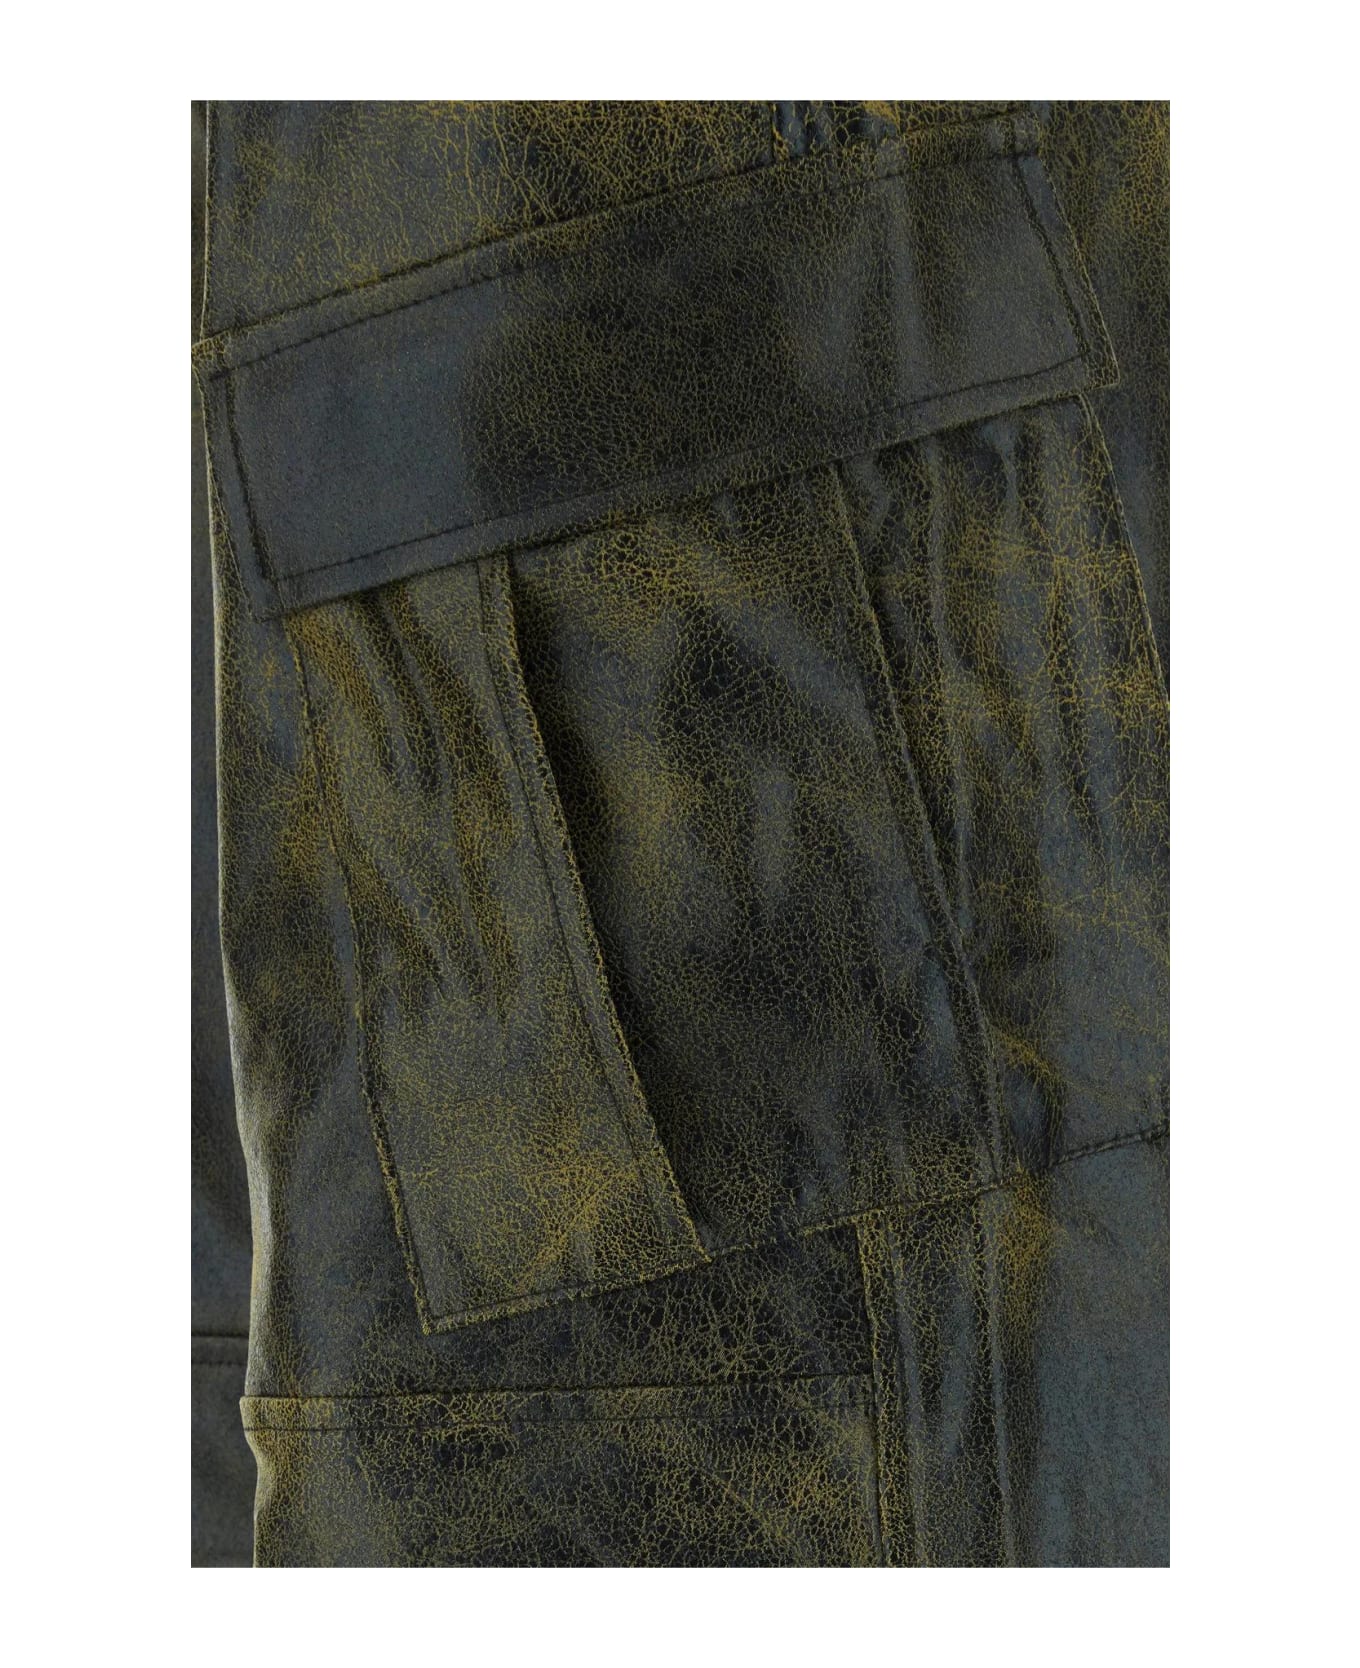 The Andamane Printed Synthetic Leather Cargo Pant - BLACK/YELLOW